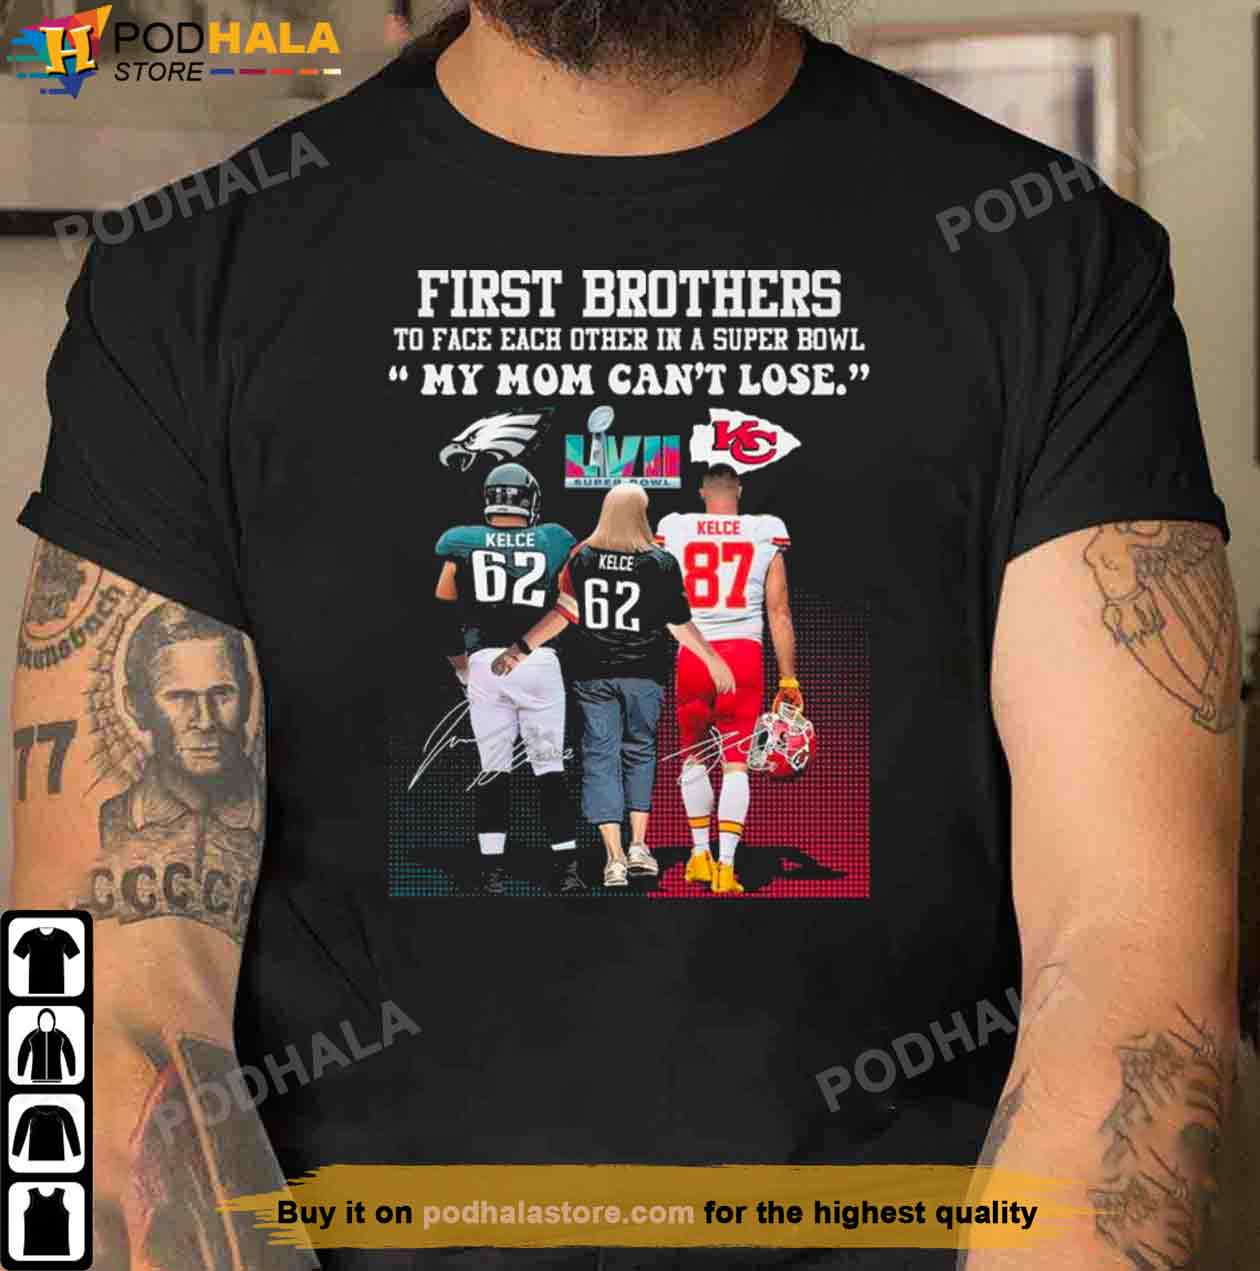 First Brothers To Face Each Other In A Super Bowl LVII Shirt My